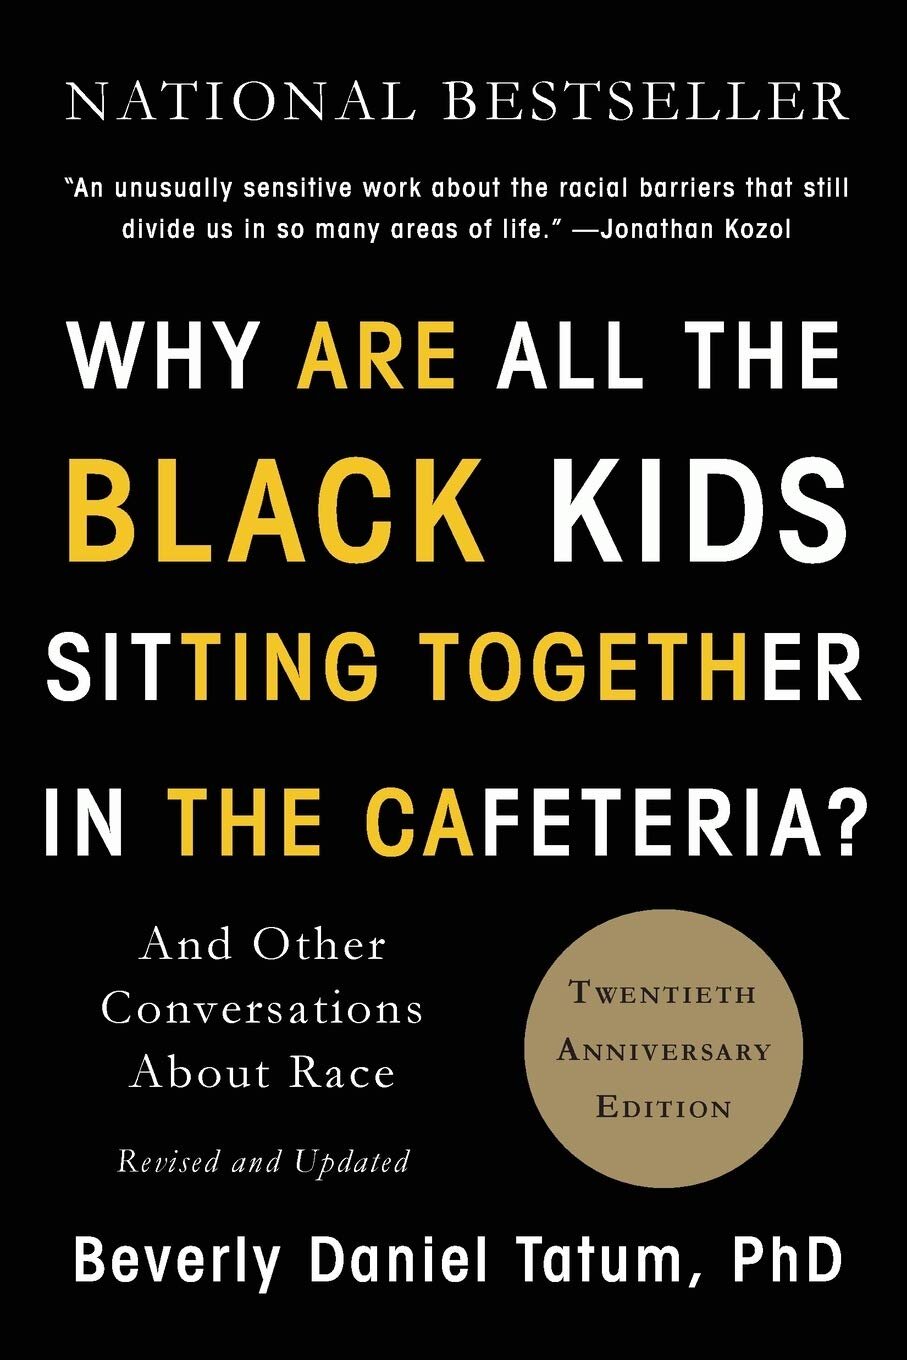 Why Are All the Black Kids Sitting Together in the Cafeteria? And Other Conversations about Race by Beverly Daniel Tatum